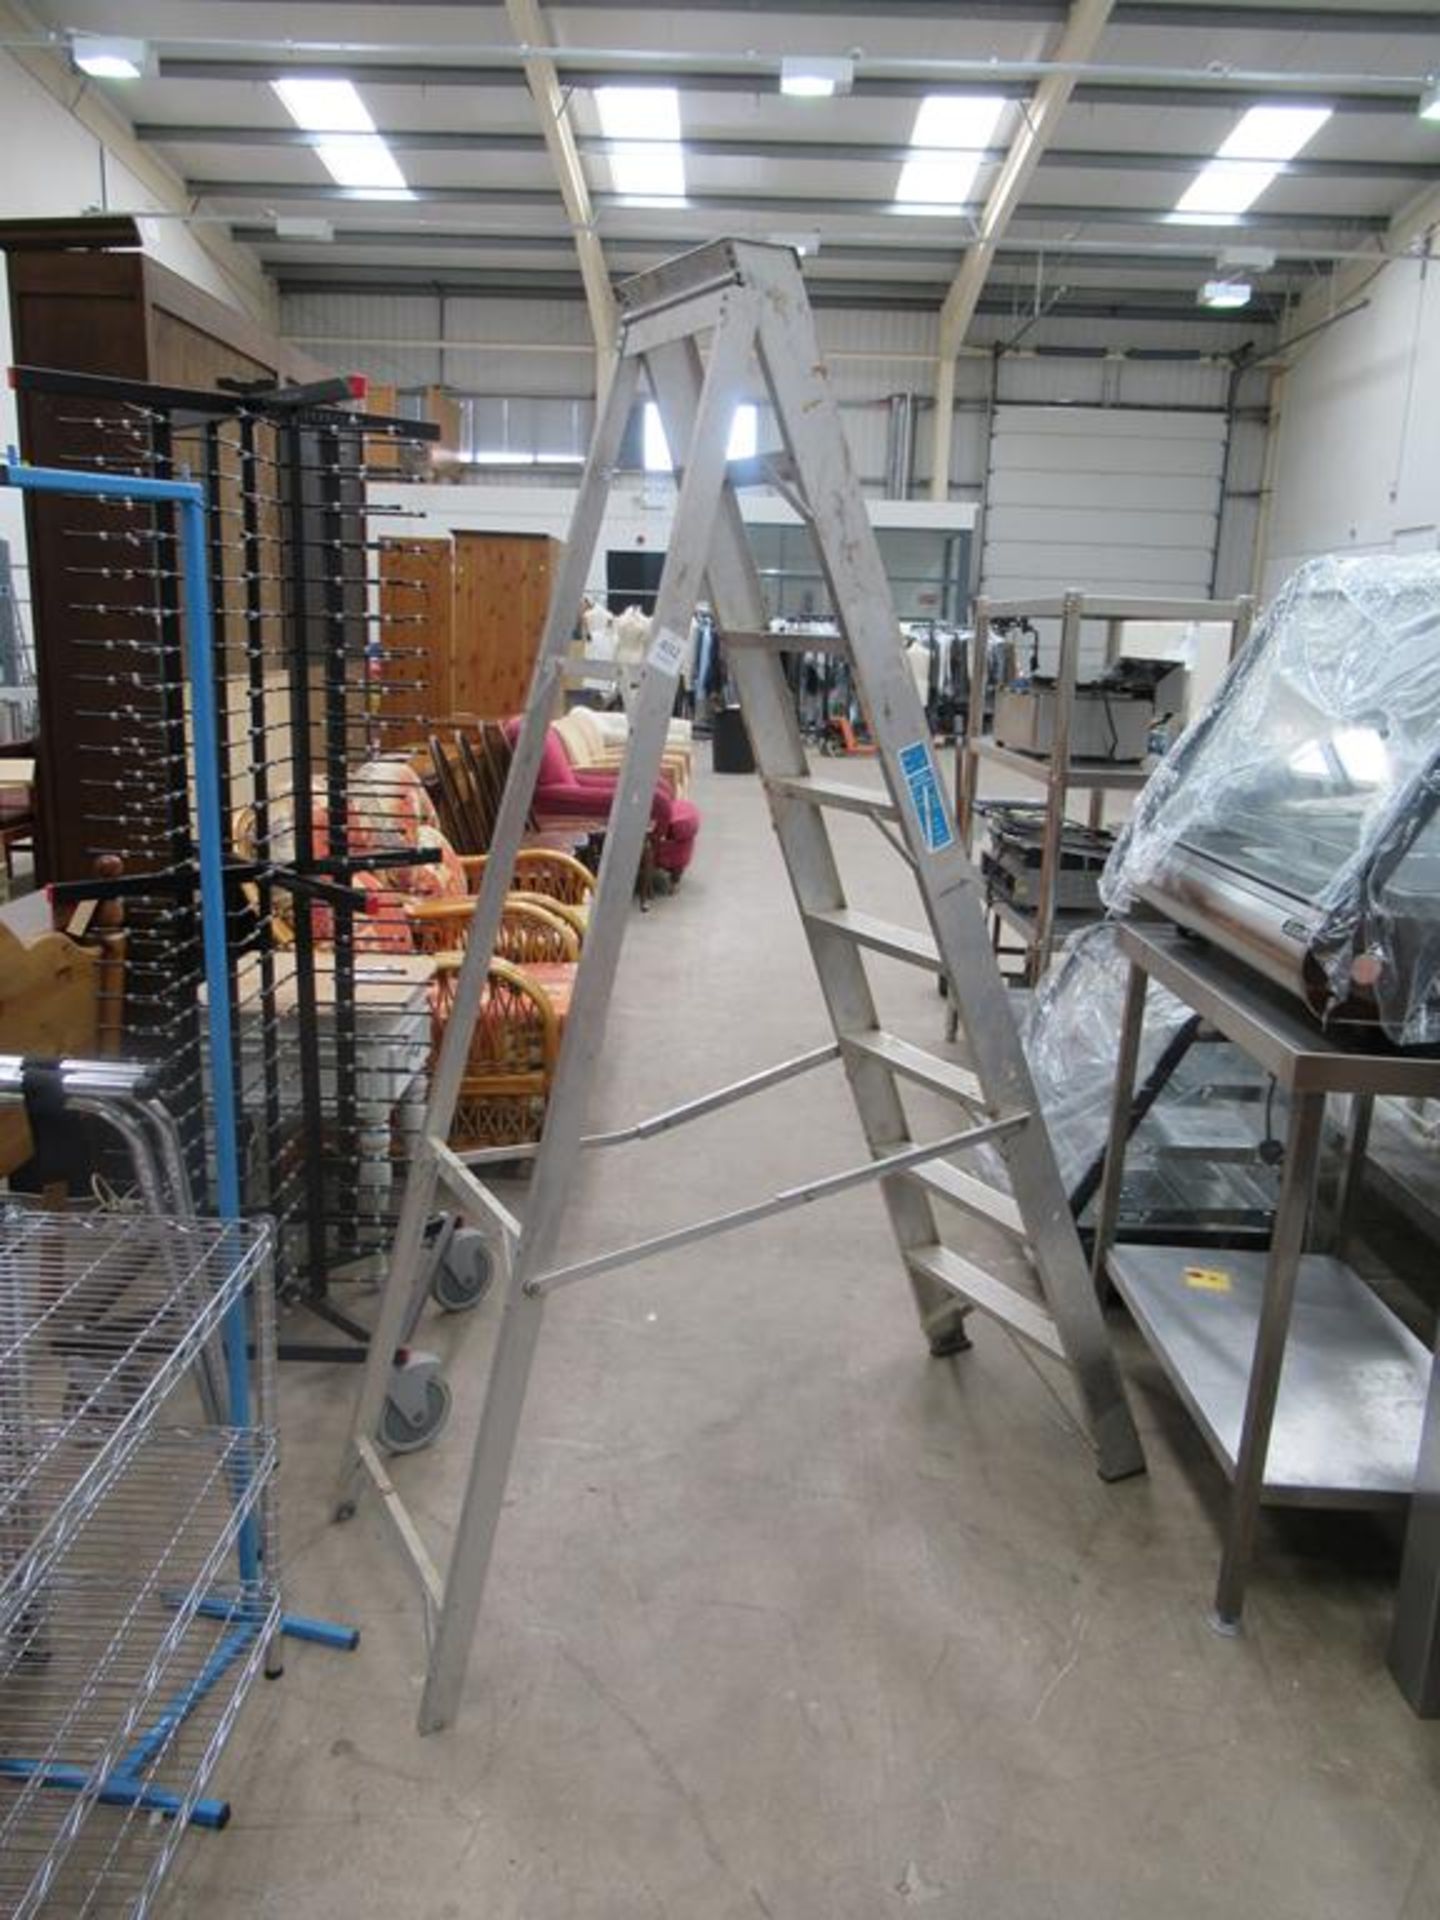 Miscellaneous items including ladders, shelving etc.